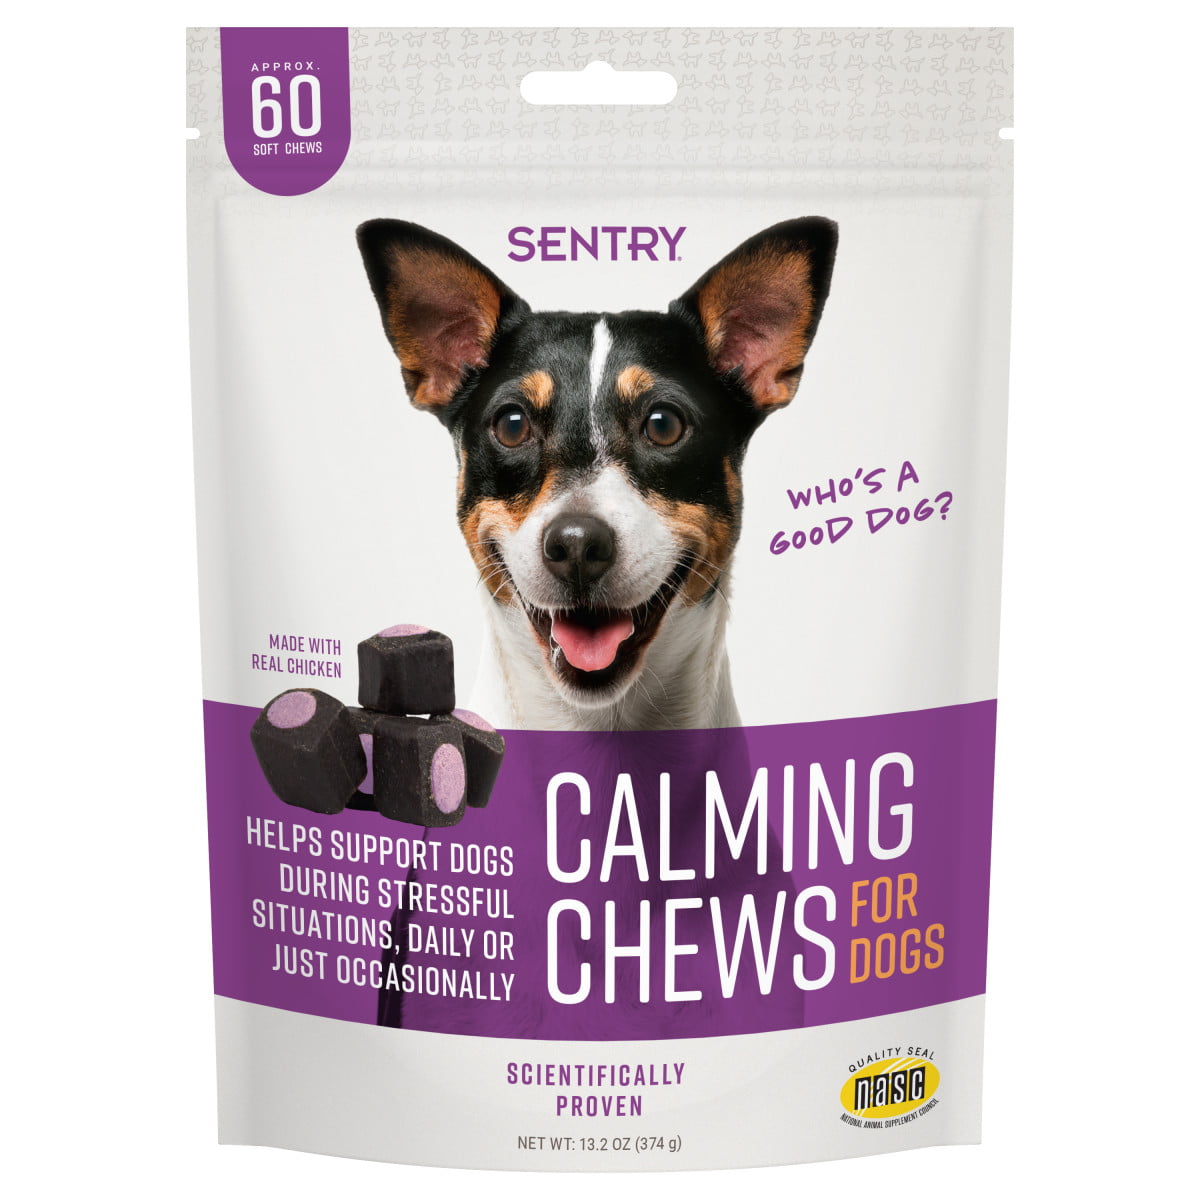 SENTRY® Calming Chews for Dogs, 60 Soft Chews